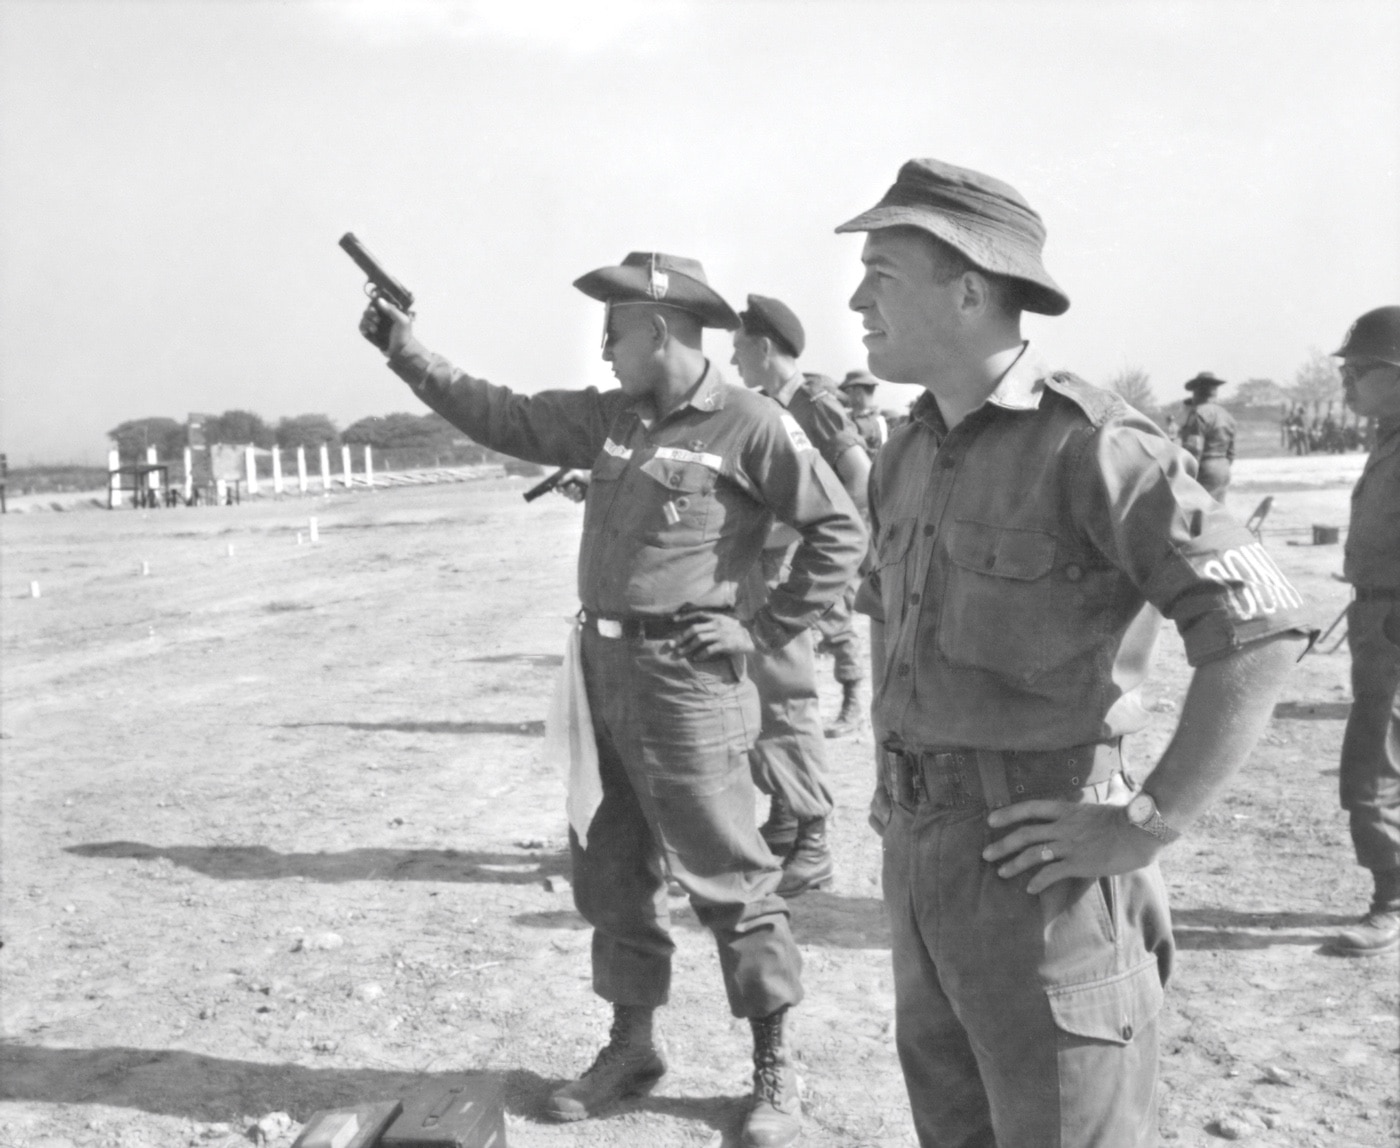 The photo shows Filipino and Australian soldiers participating in a shooting competition outside of Saigon. The competition was for all of the Allied nations deployed to Vietnam. He is shooting one handed with a M1911 pistol.